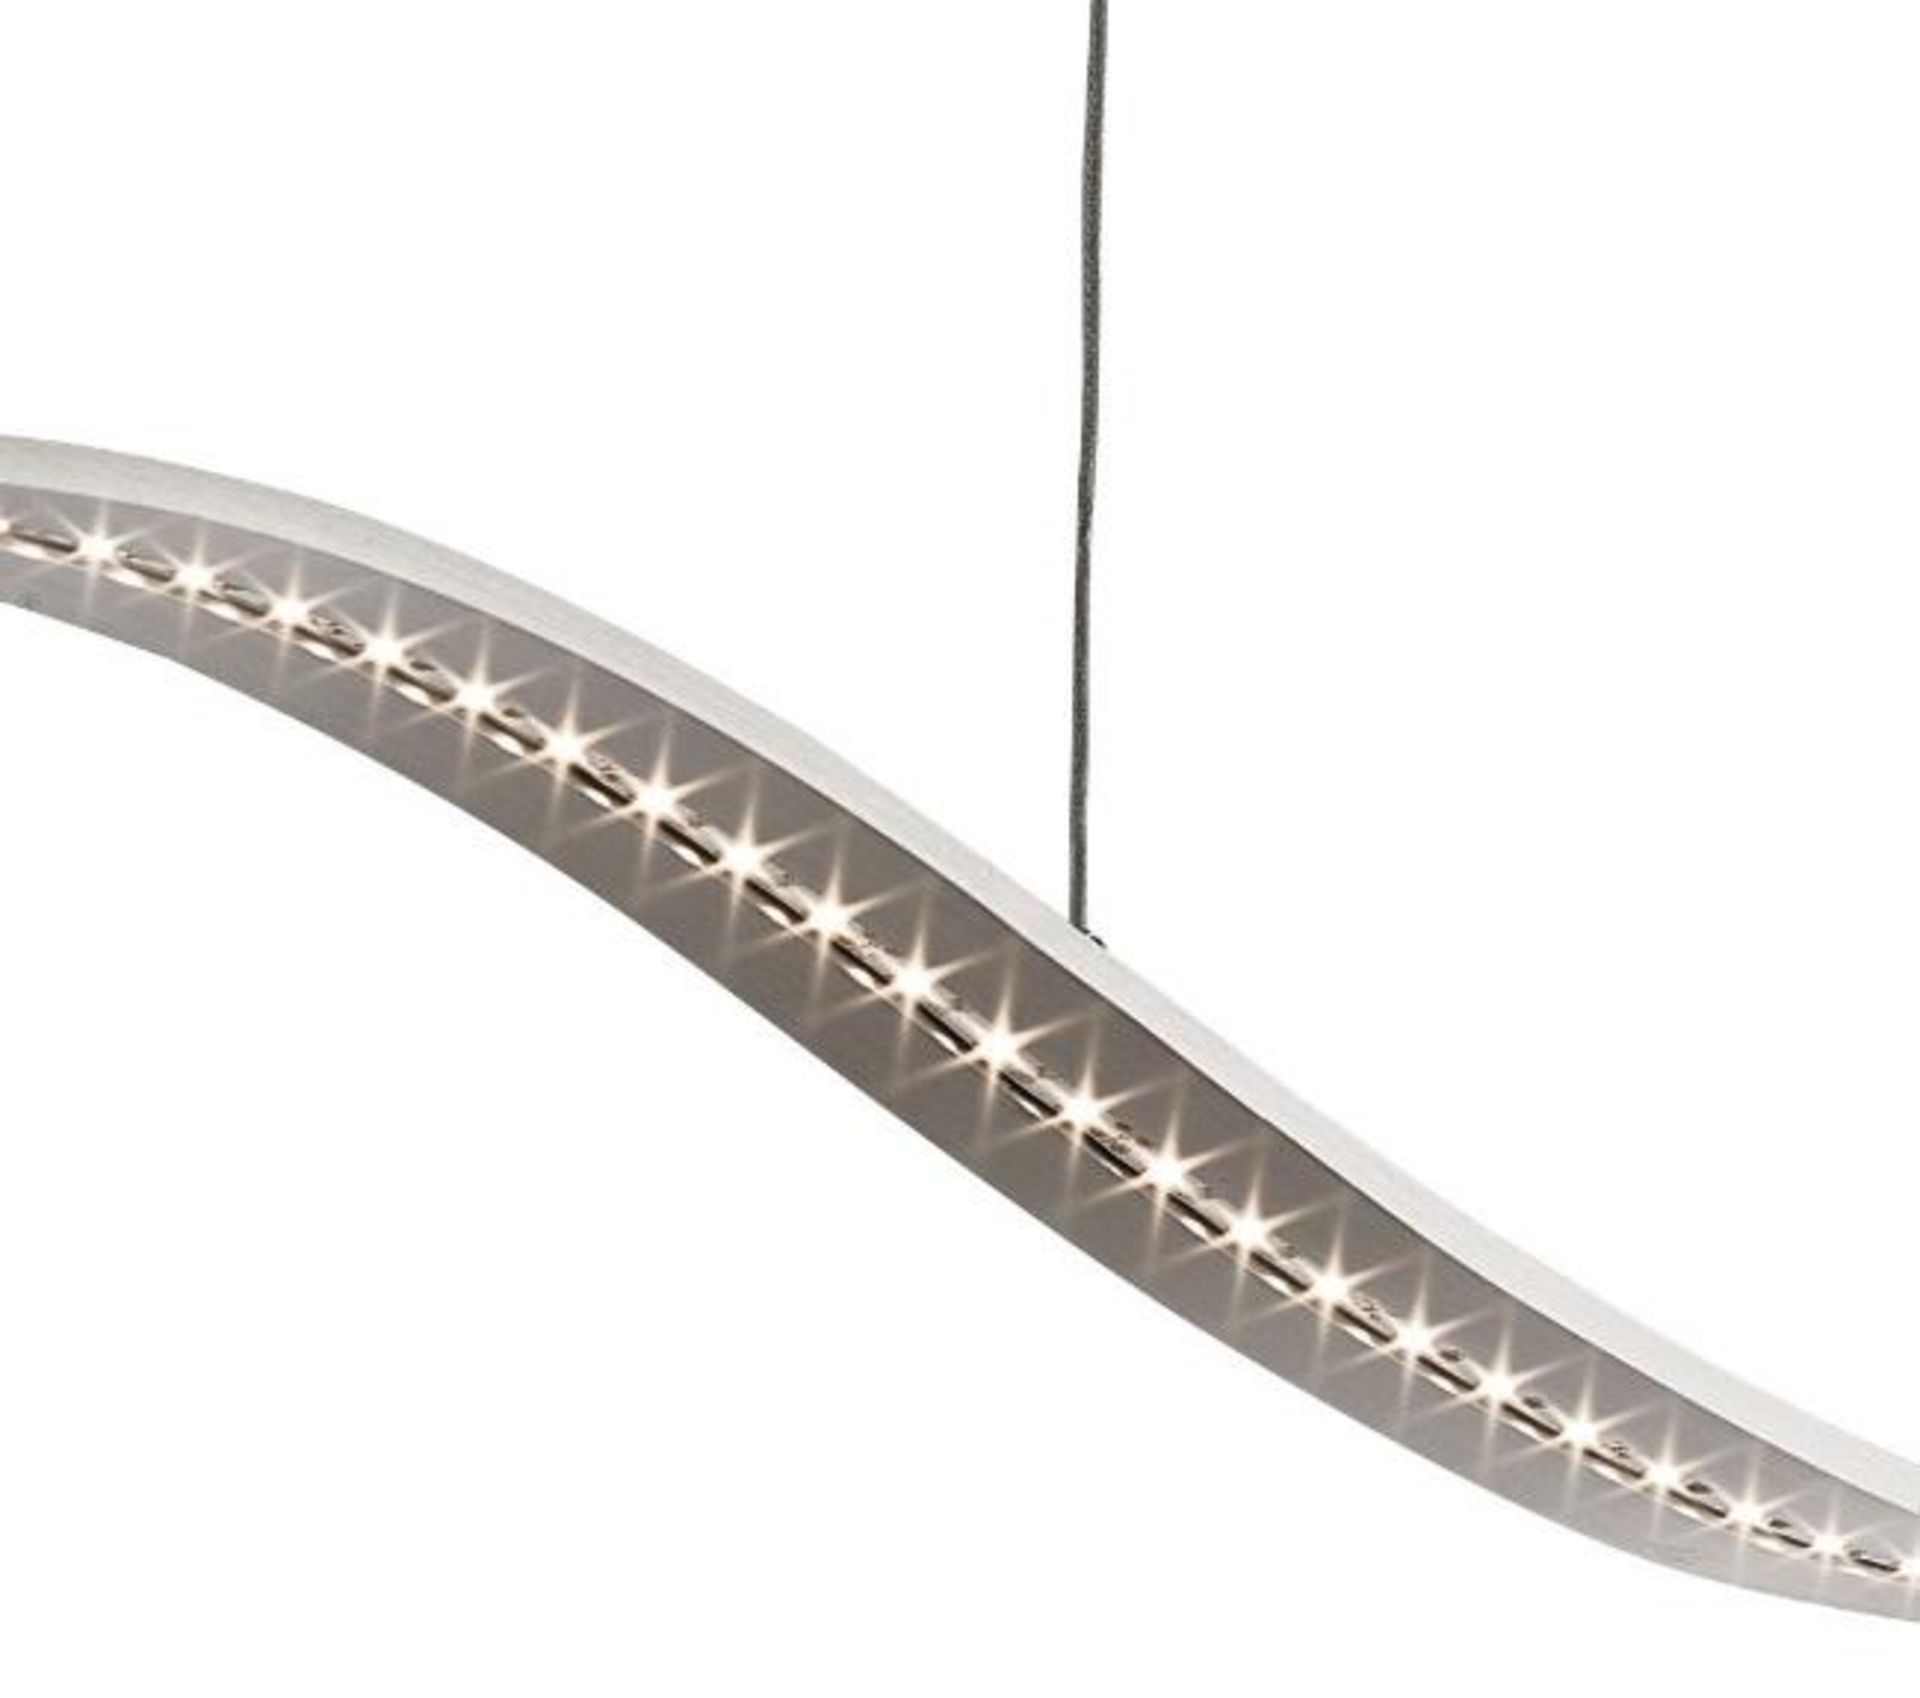 1 x Satin Silver LED Wavy Bar Light Fitting - New Boxed Stock - CL323 - Ref: 2076SS / PalF - Locatio - Image 2 of 3